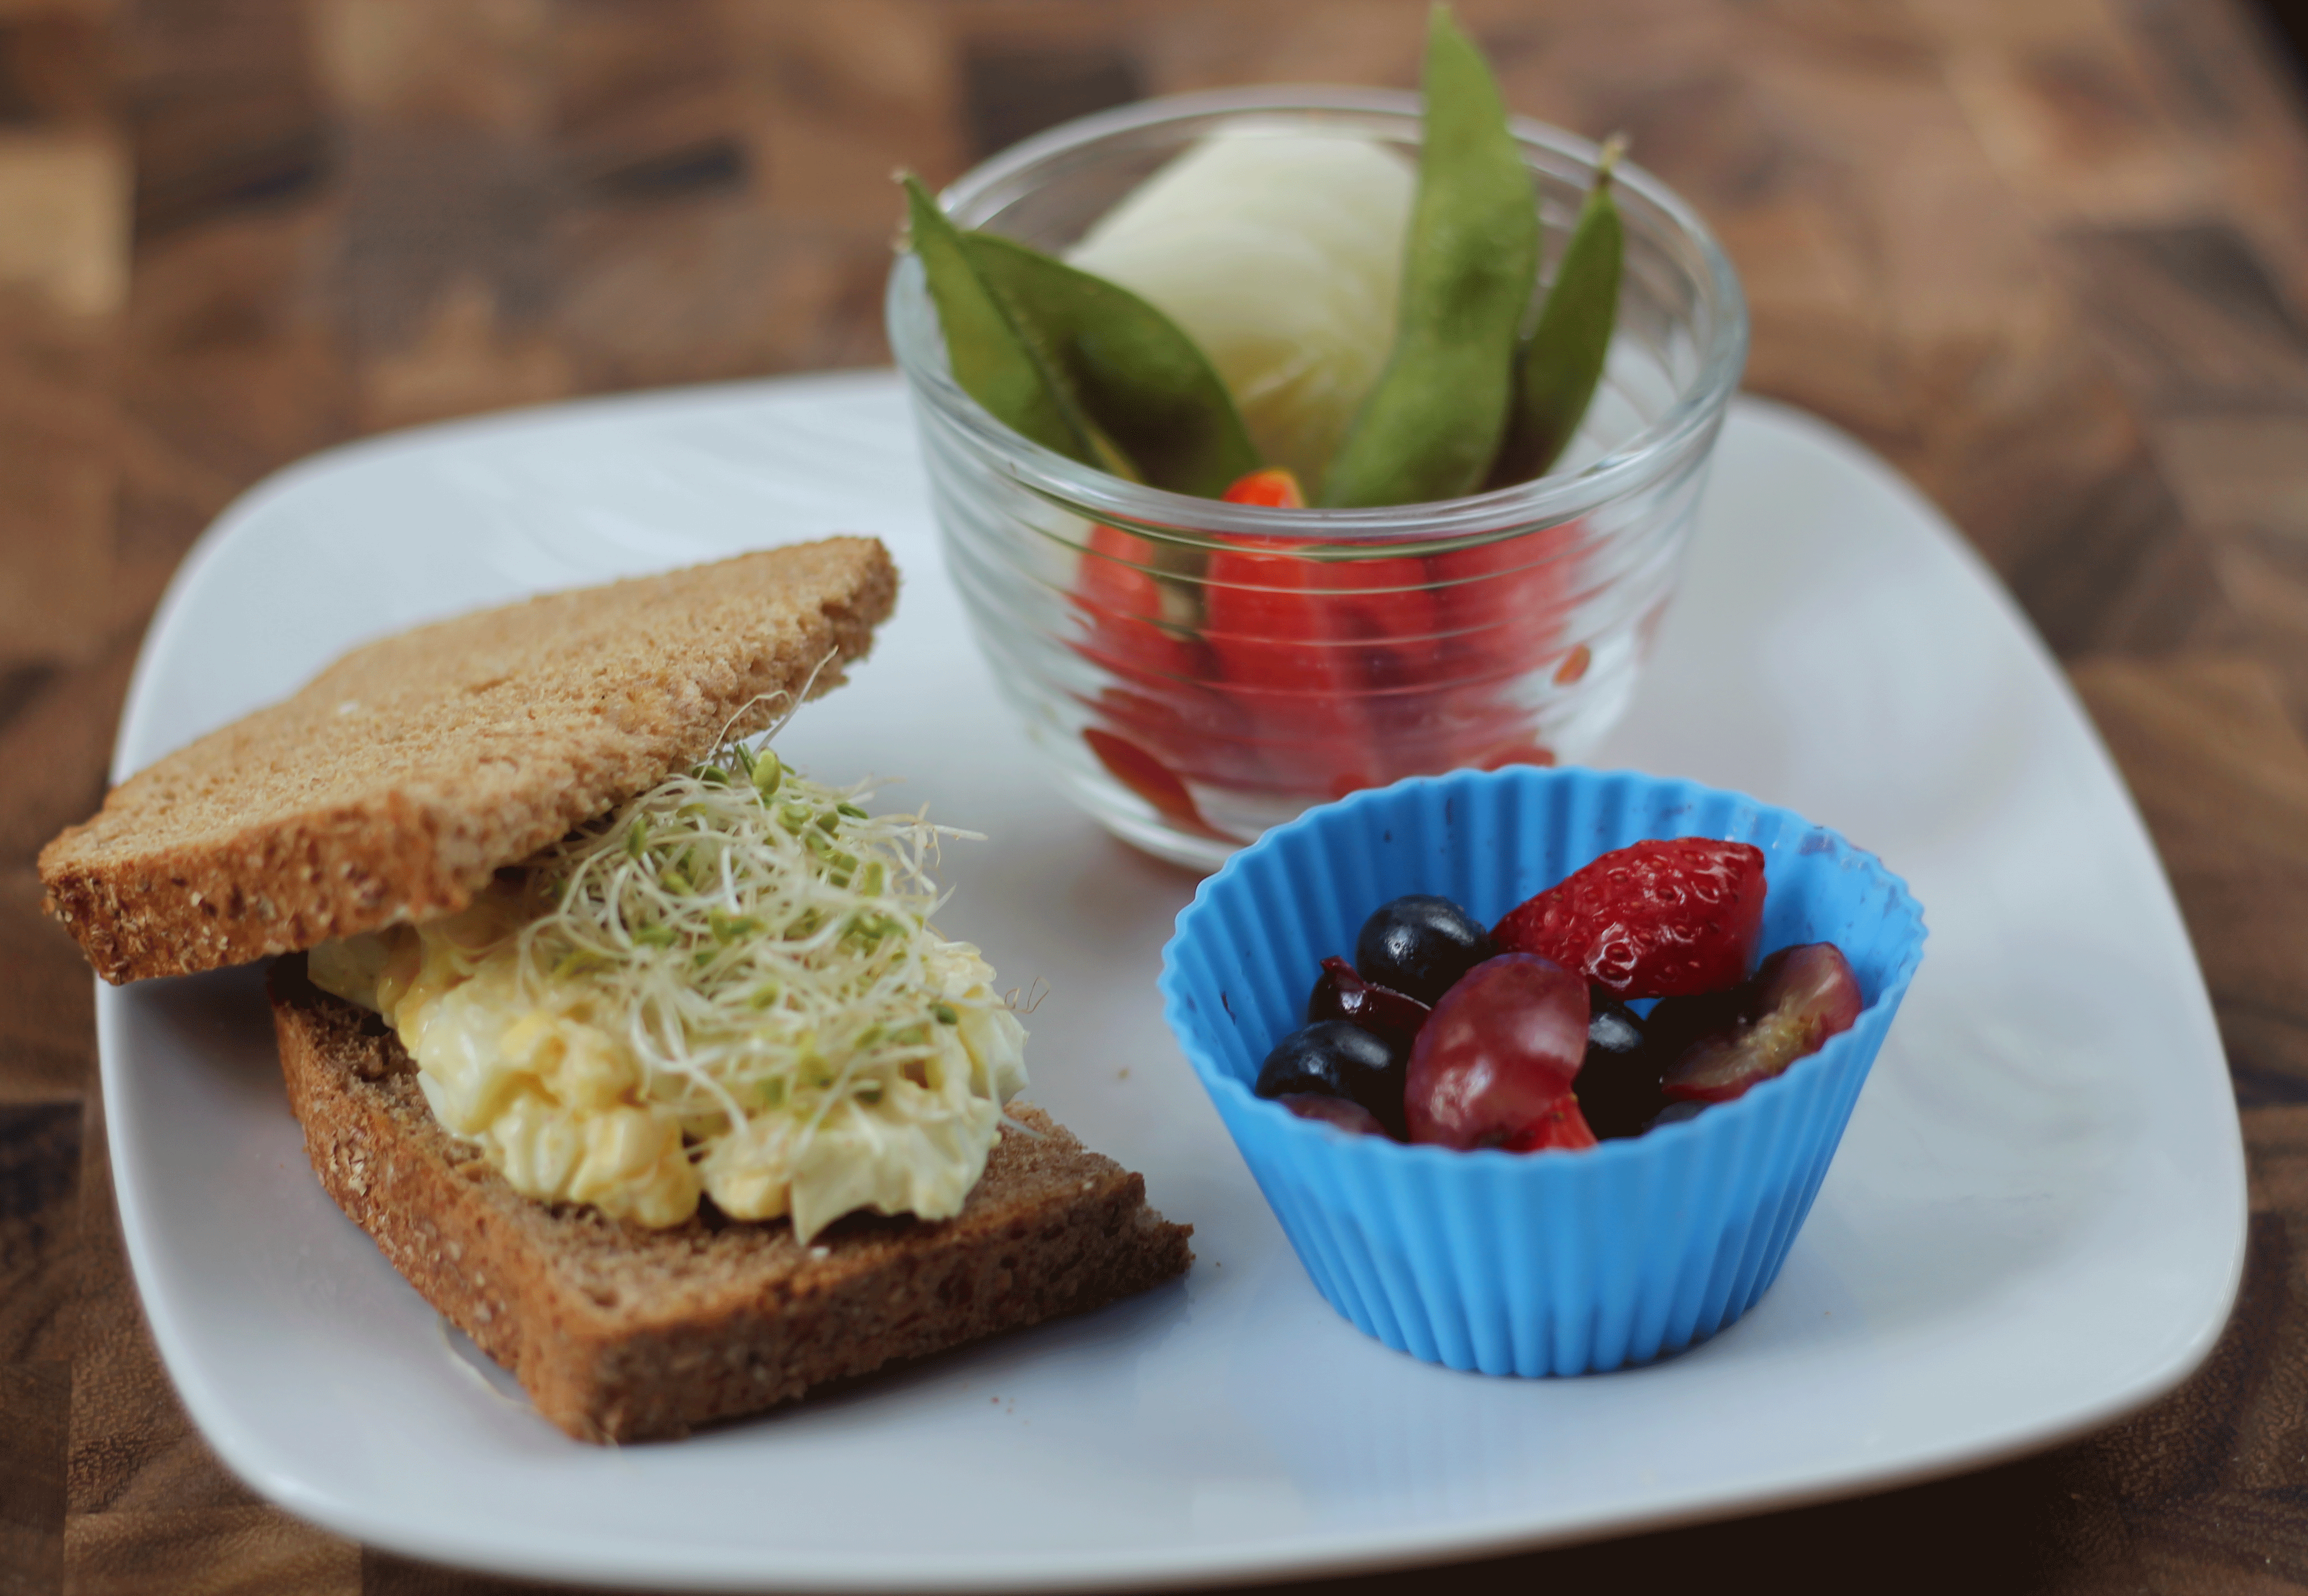 Back to School Lunch Ideas- Easy Egg Salad and Sprouts Sandwich. This super easy egg salad takes seconds to prepare. Topped with alfalfa sprouts for a fun twist.